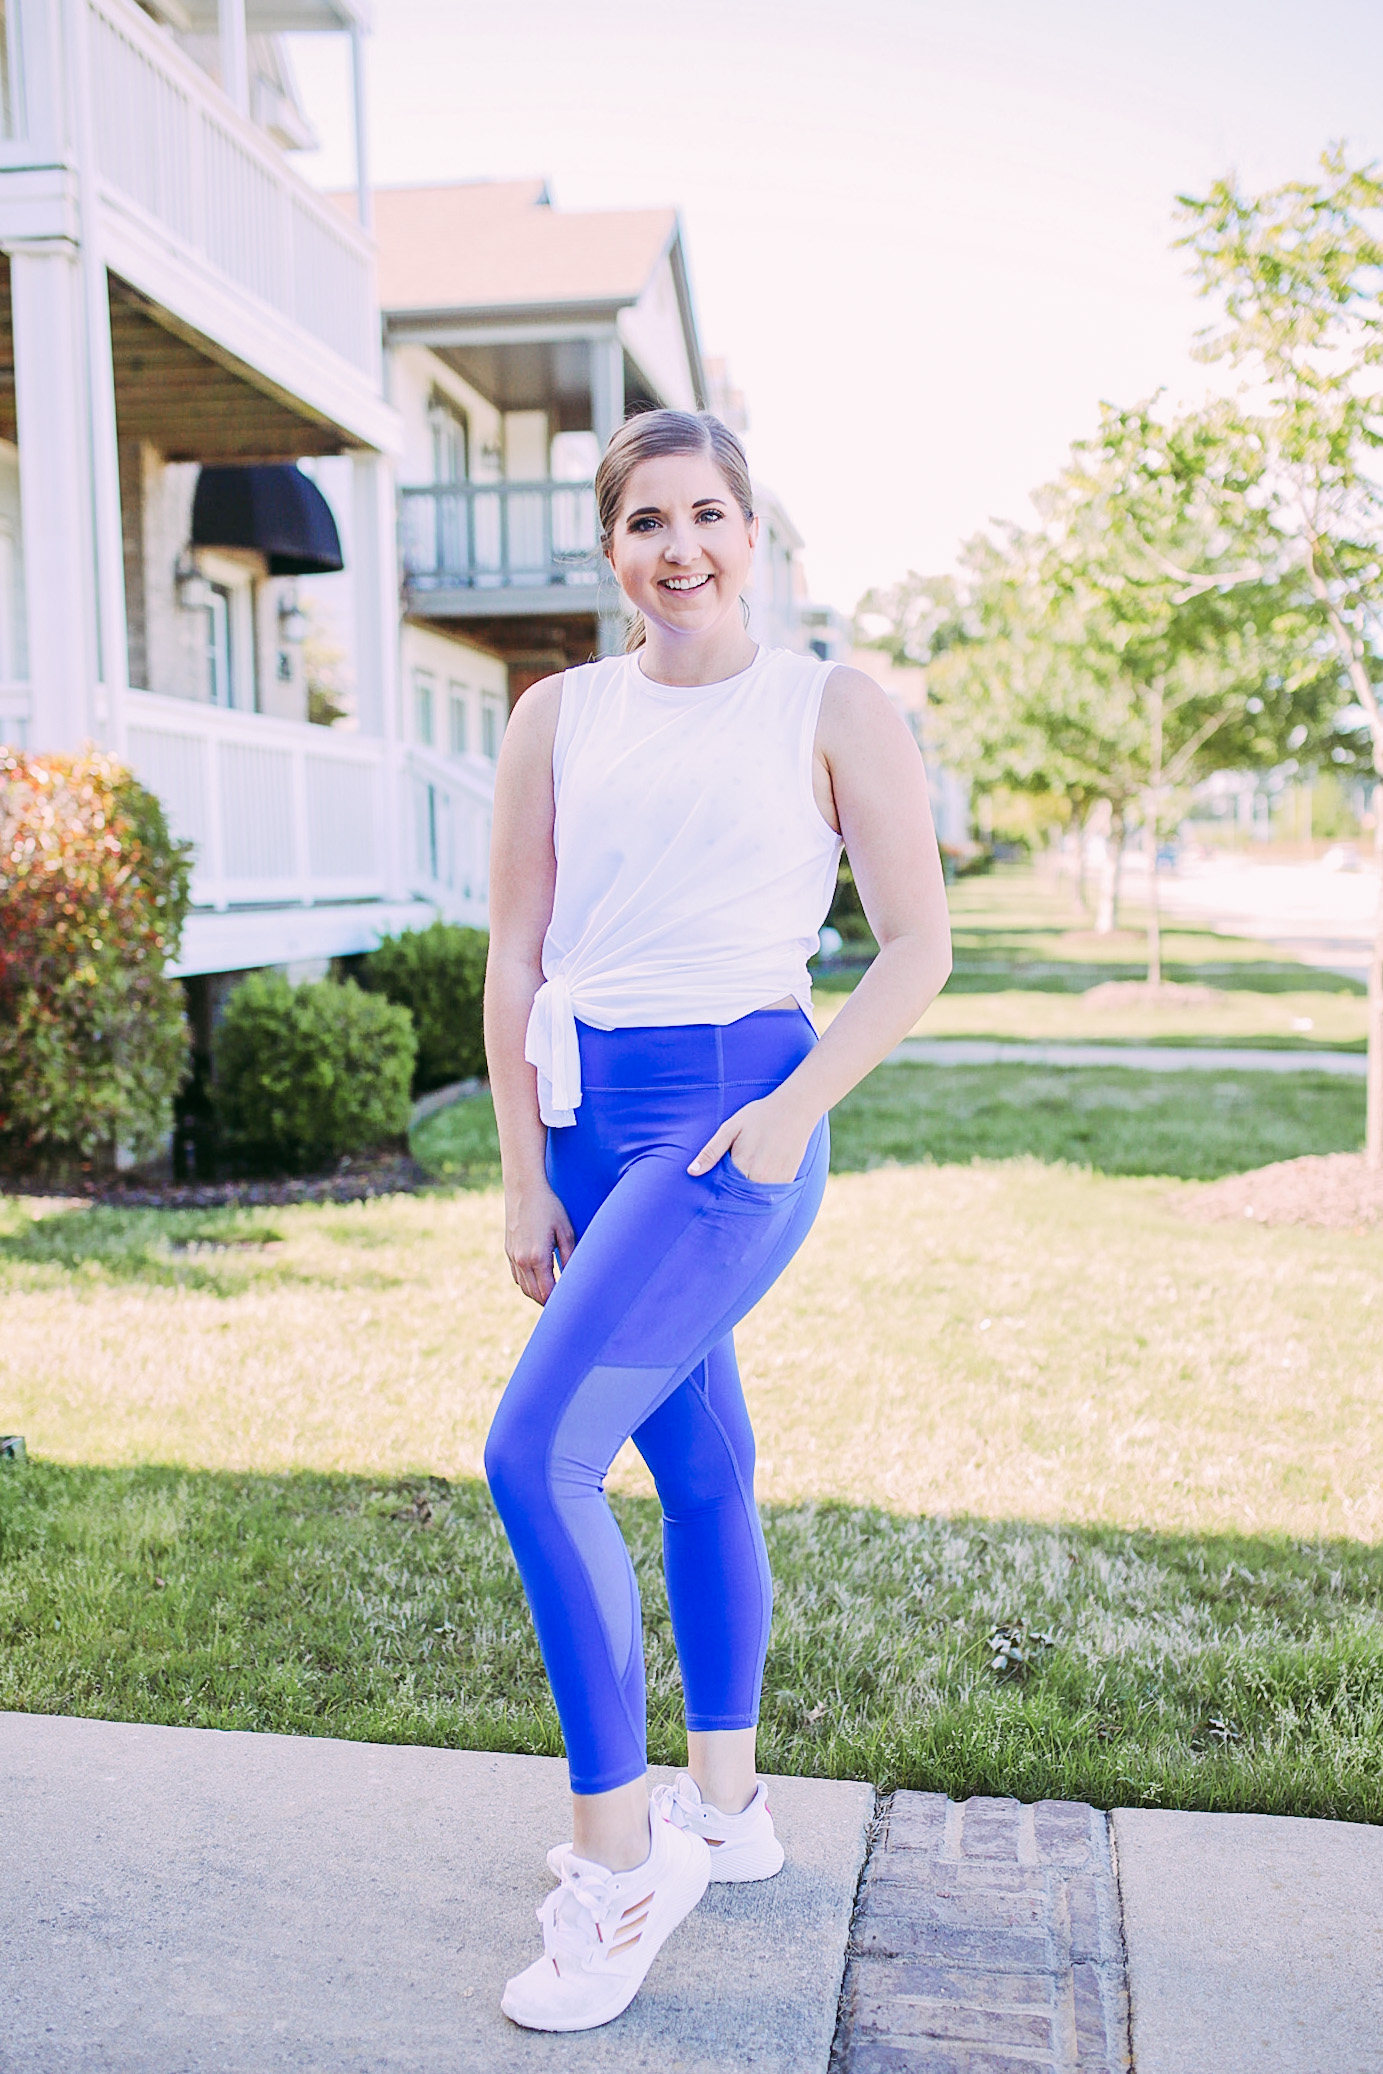 Is the Fabletics VIP Membership Really Worth the Hype? I Found Out.